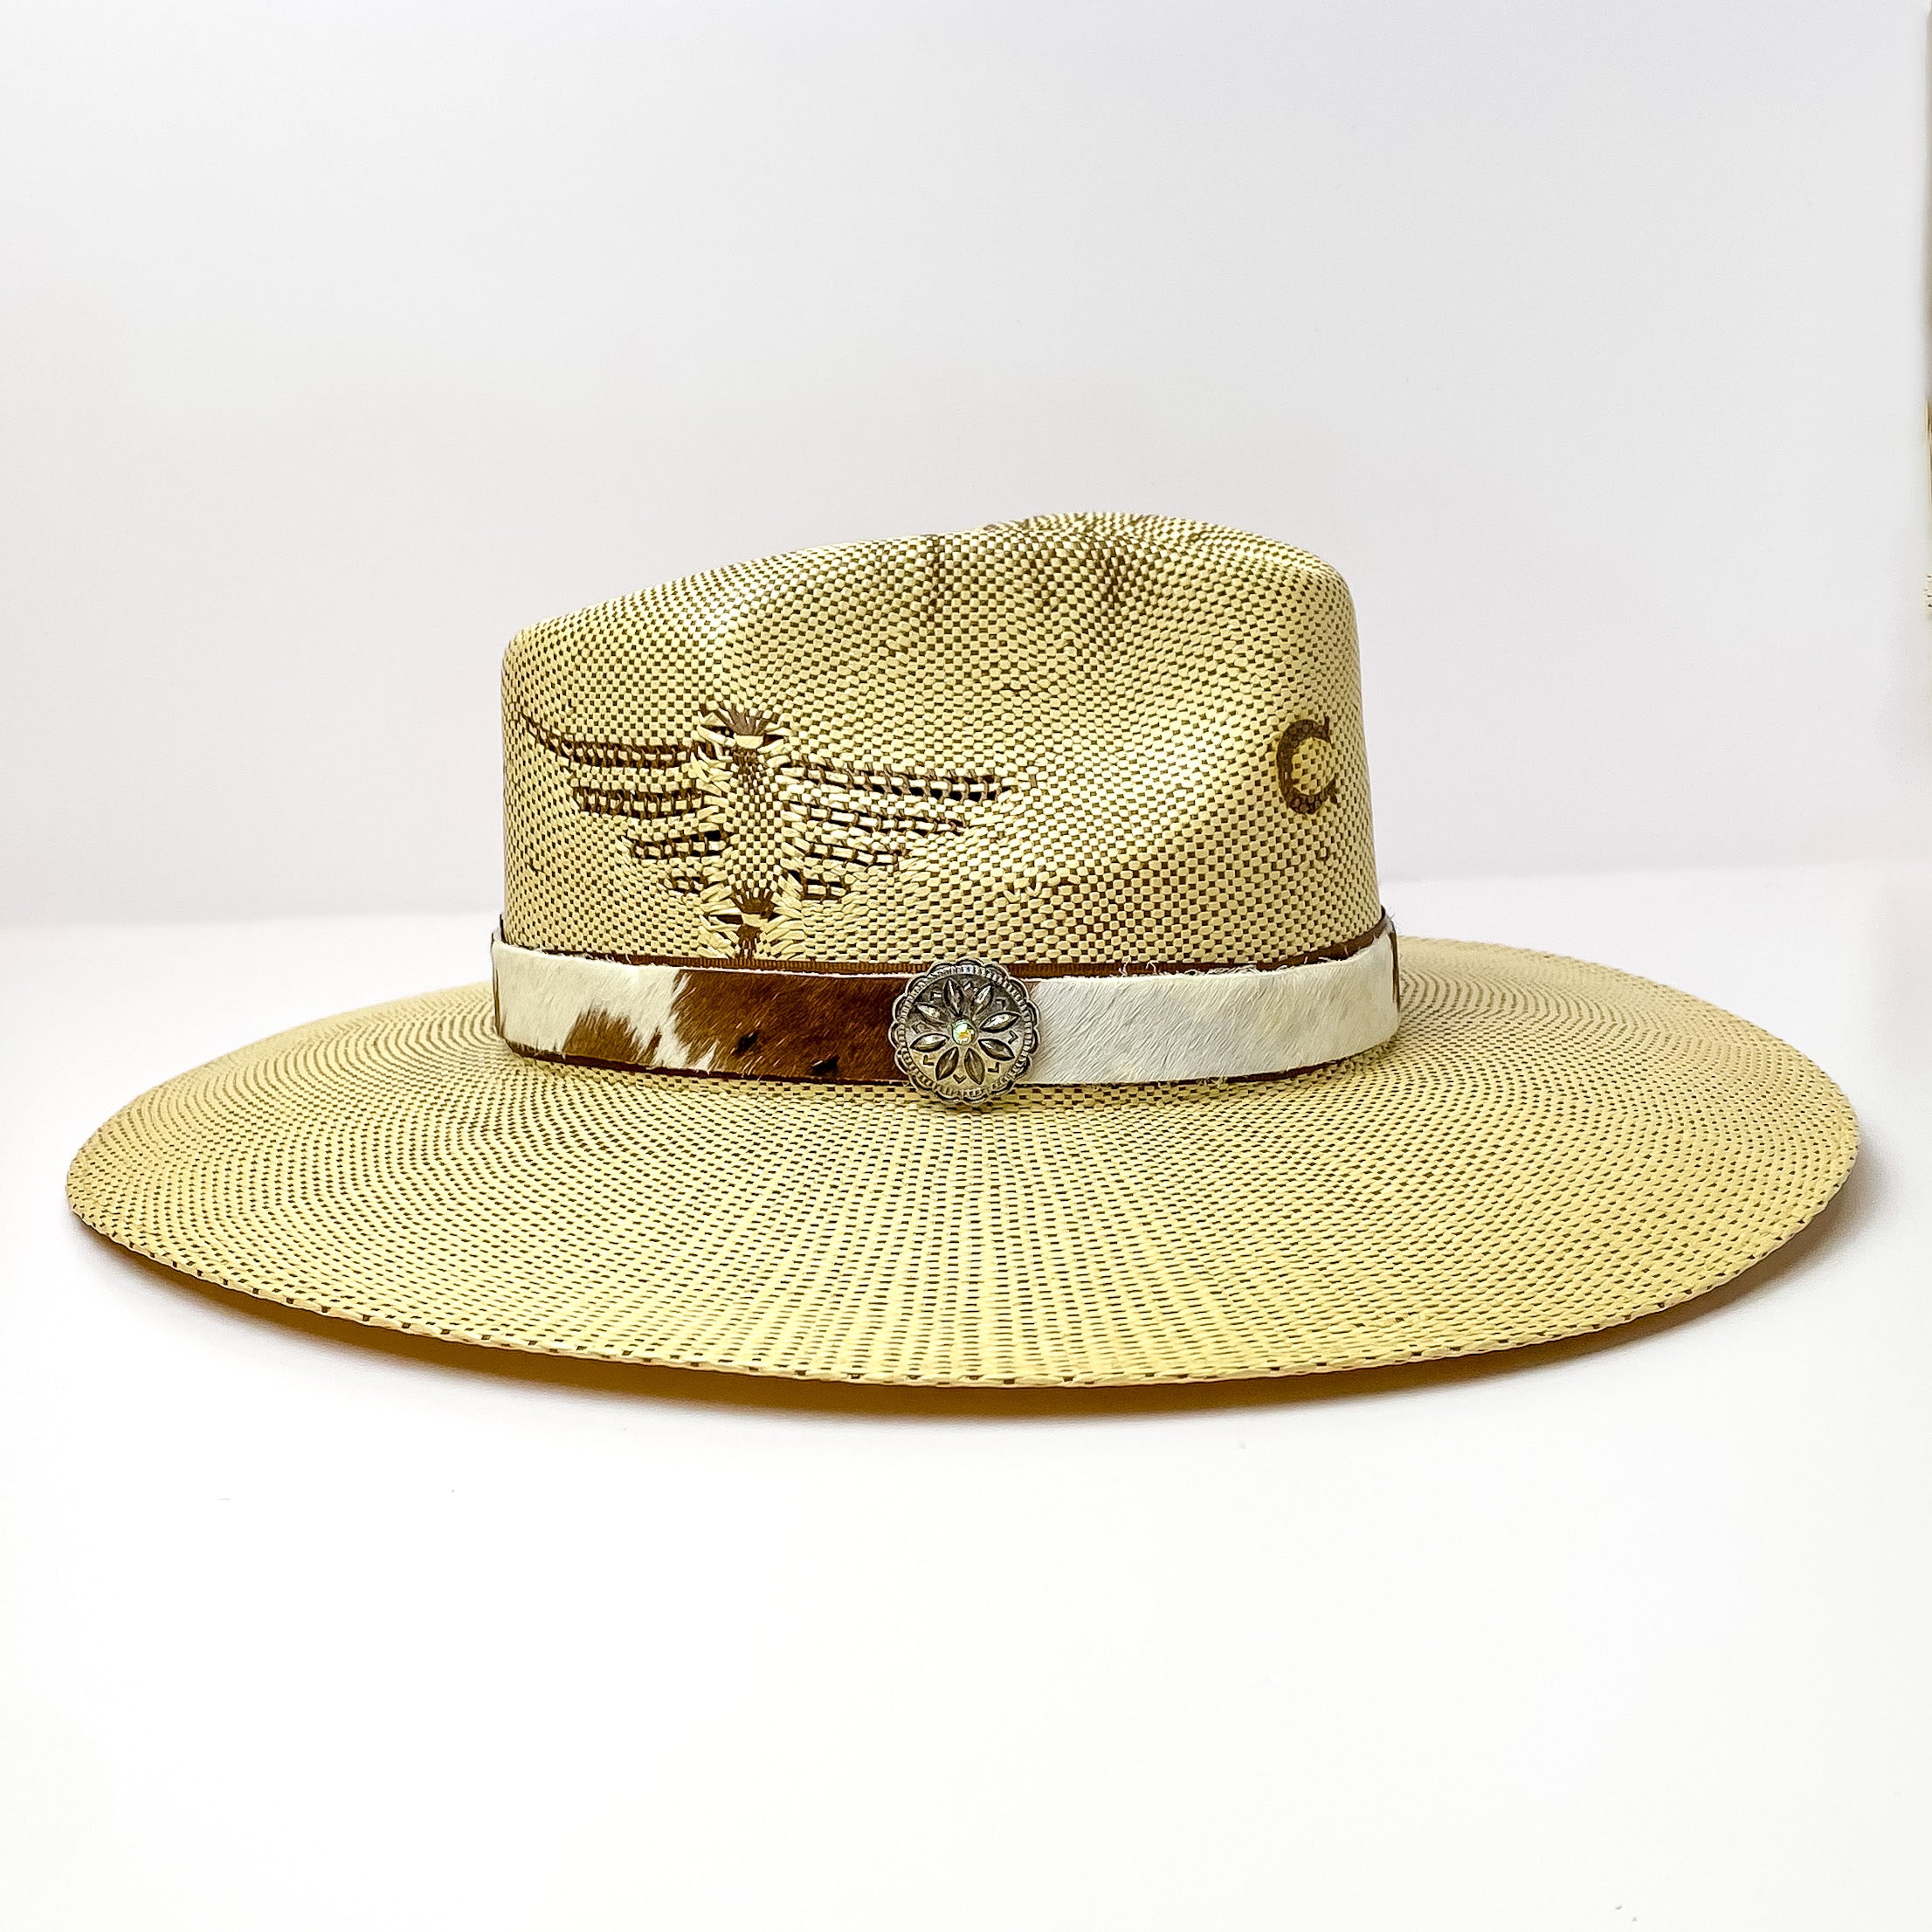 Cow Print Hat Band with Silver Tone Concho Charm in Brown, Grey, and White - Giddy Up Glamour Boutique